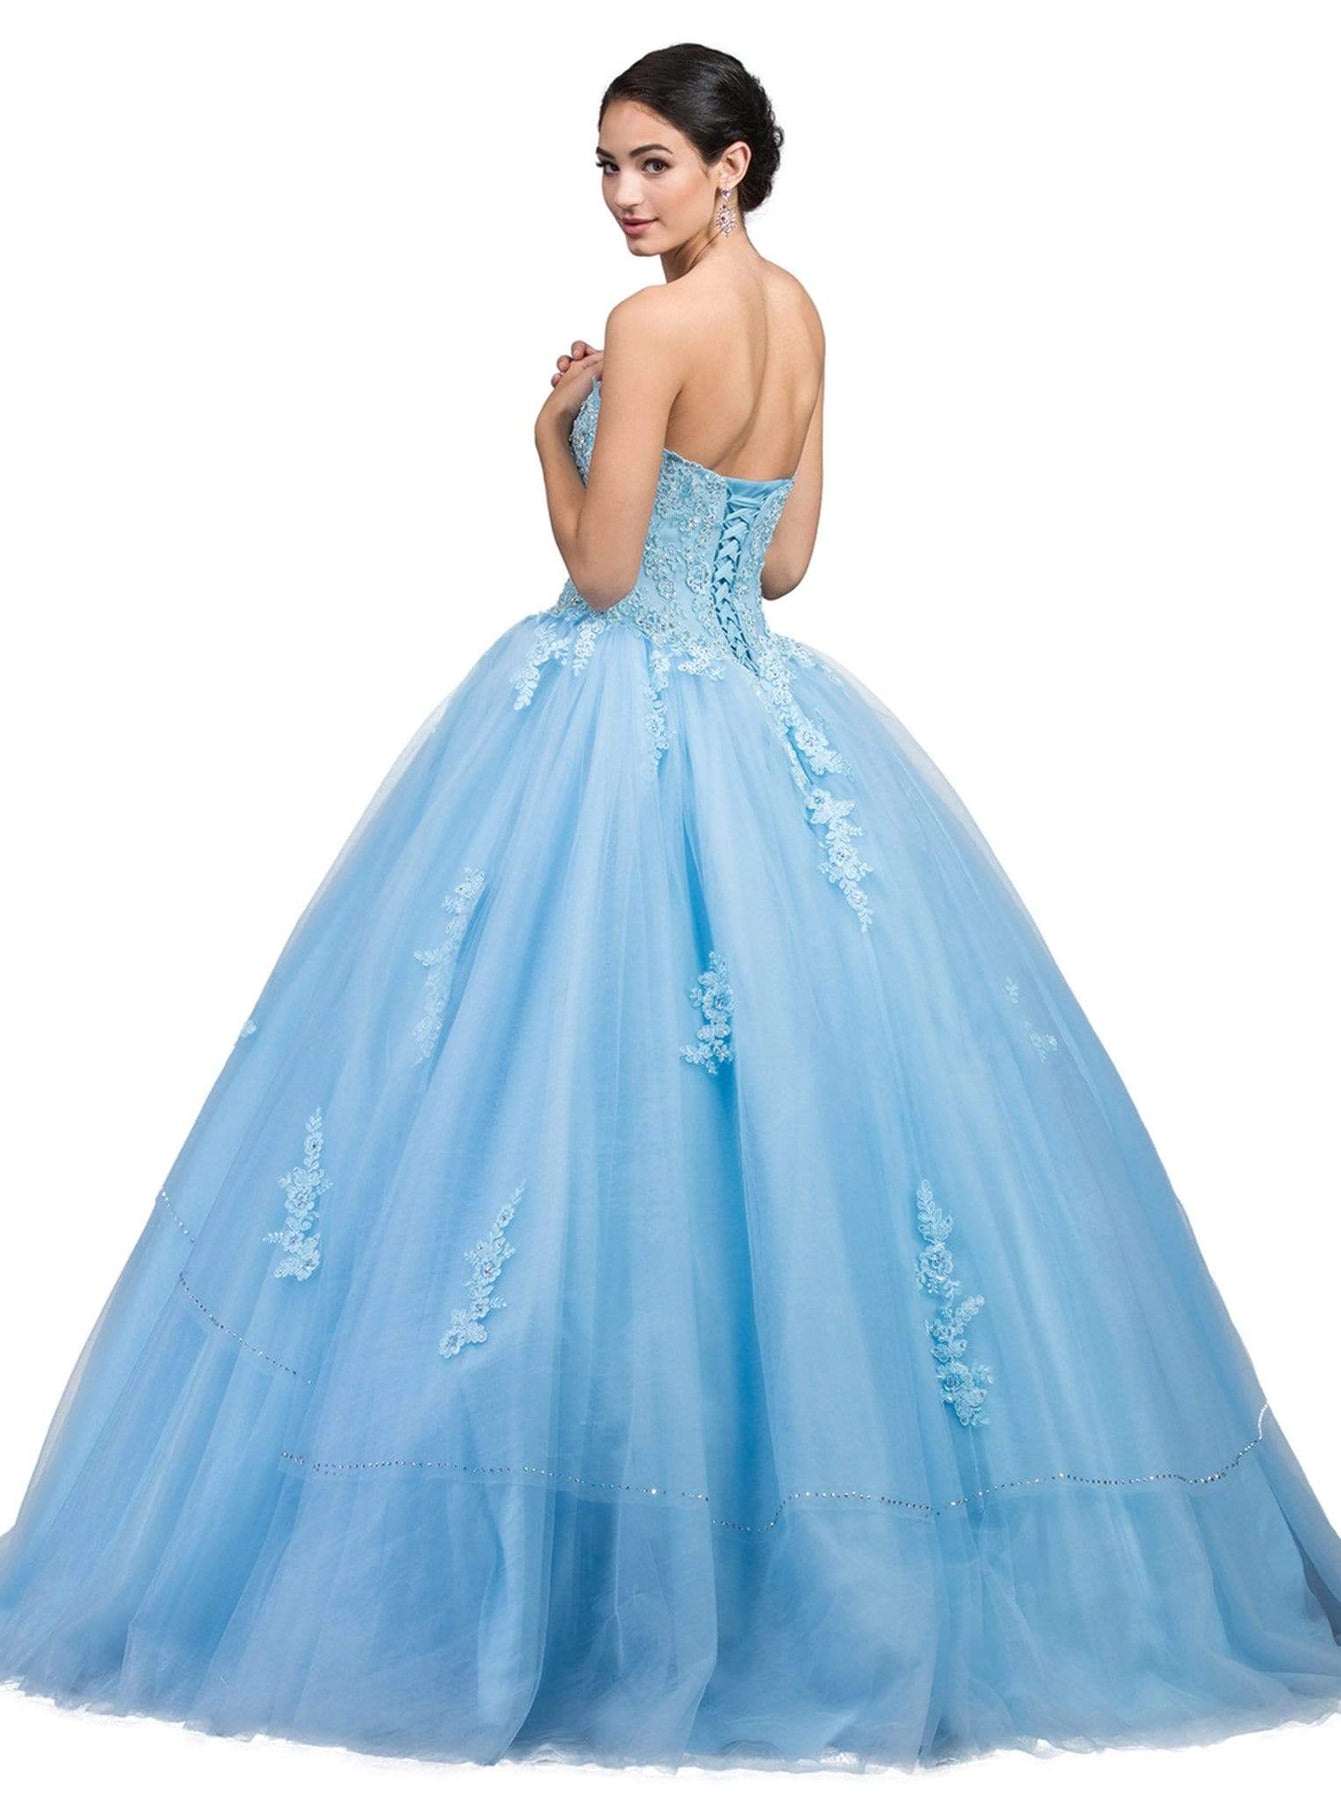 Dancing Queen - 1224 Strapless Sweetheart Lace-up Back Ballgown Special Occasion Dress